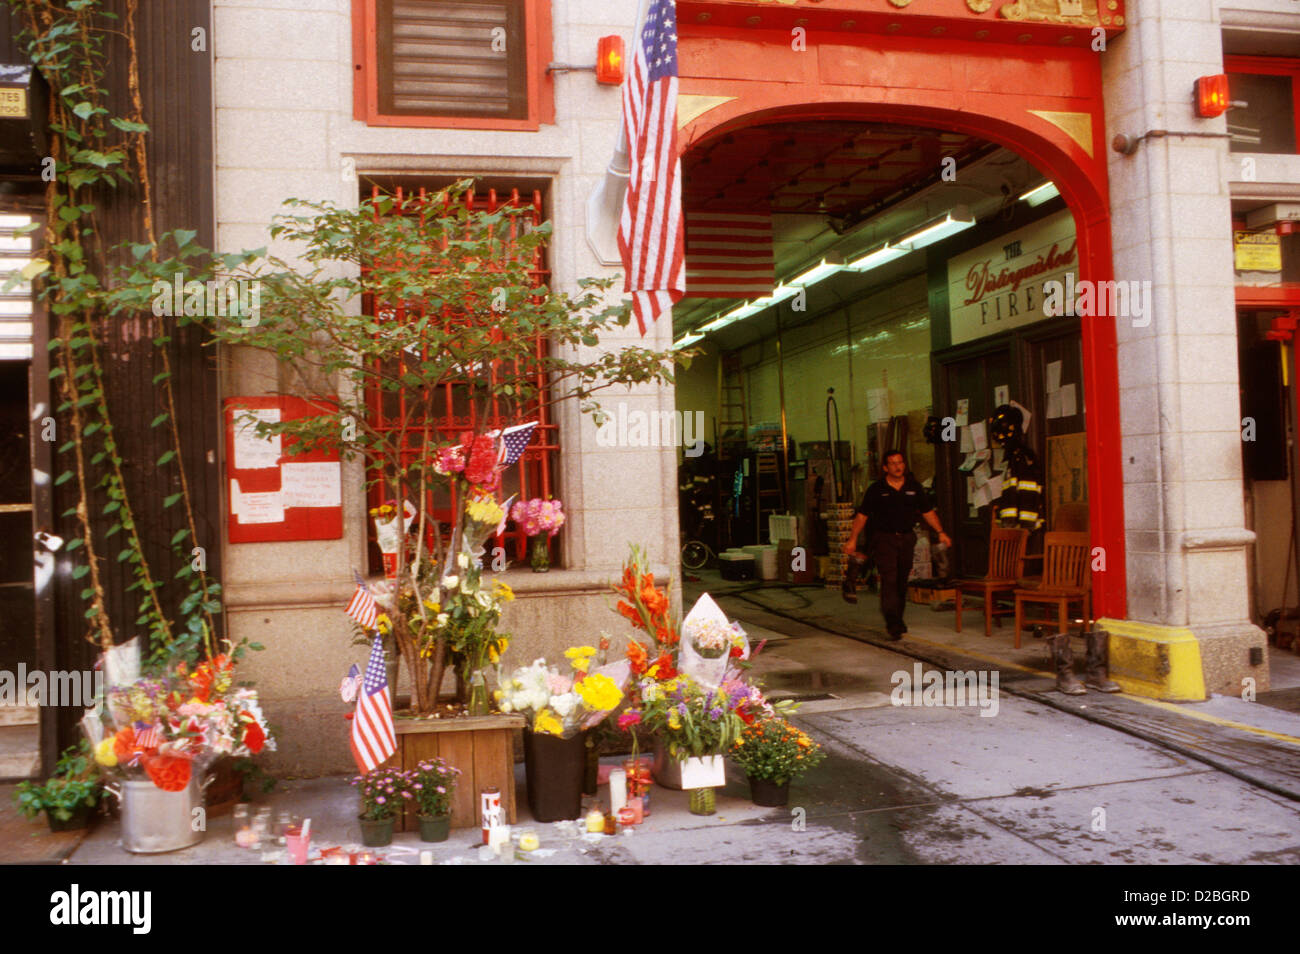 New York City, 9/11/2001. Memorials Placed At Fire Station #14 Following World Trade Center Attack Stock Photo